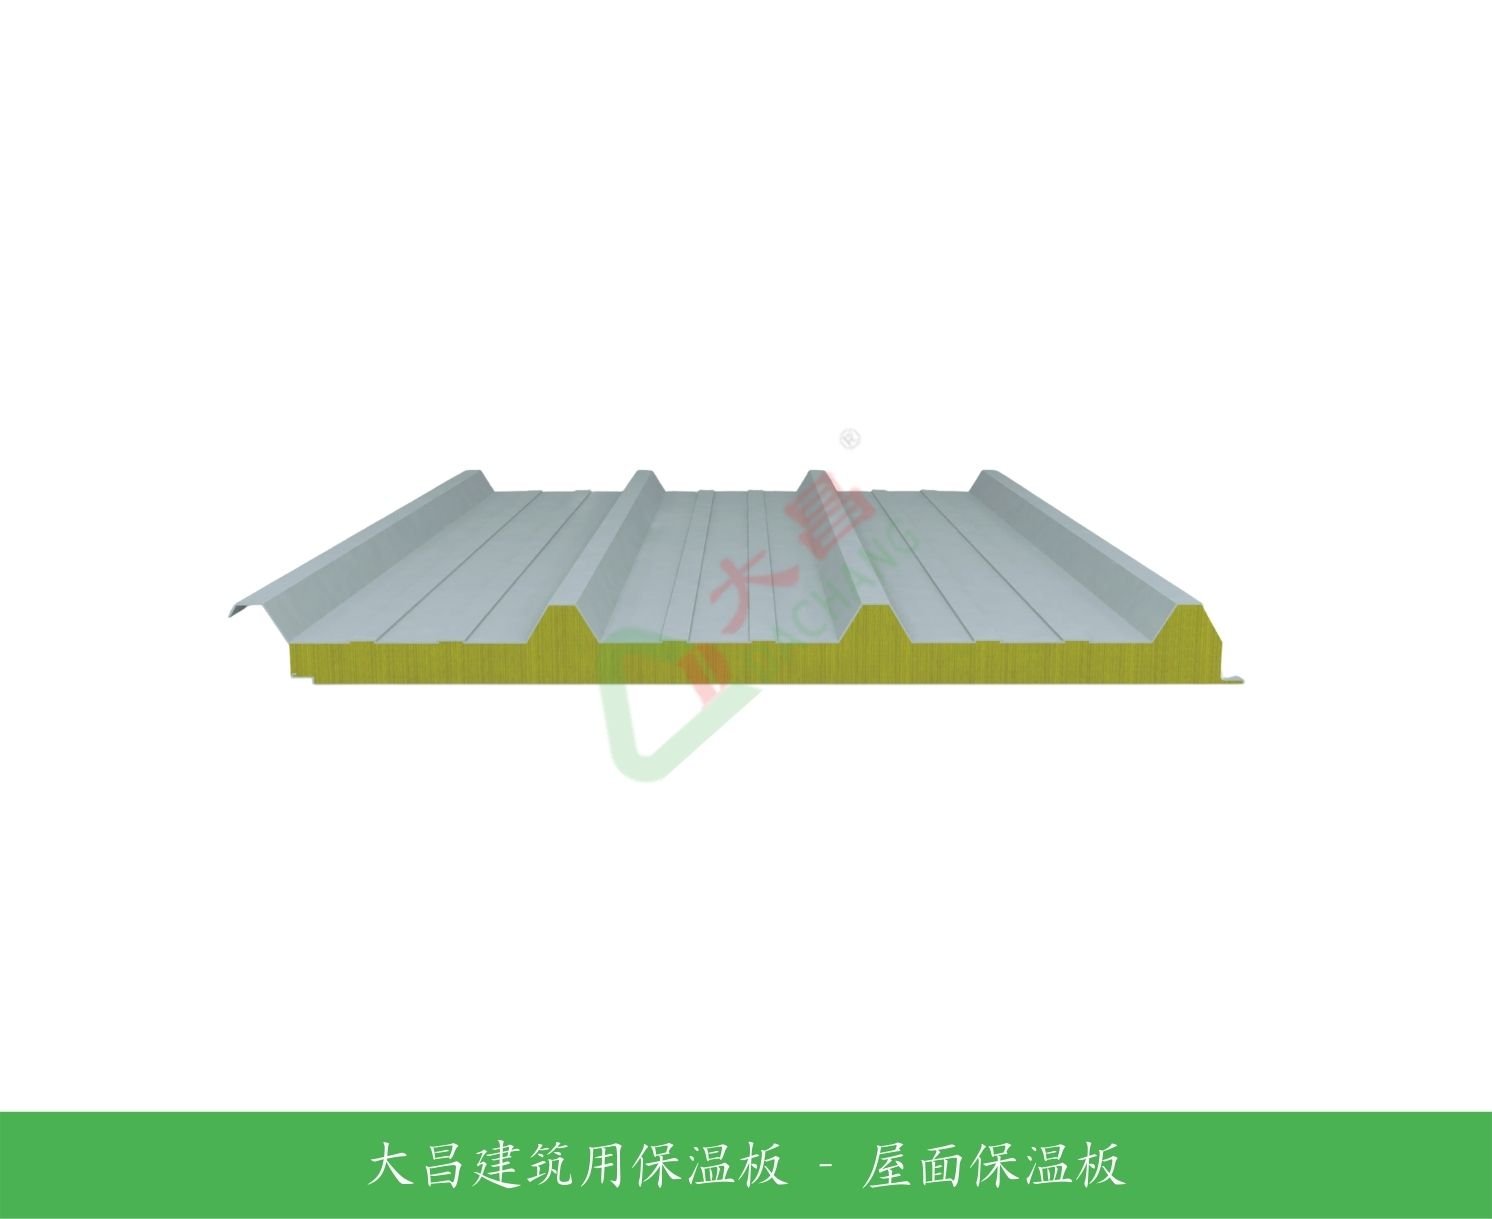 200mm Insulated Roof Sandwich  ...